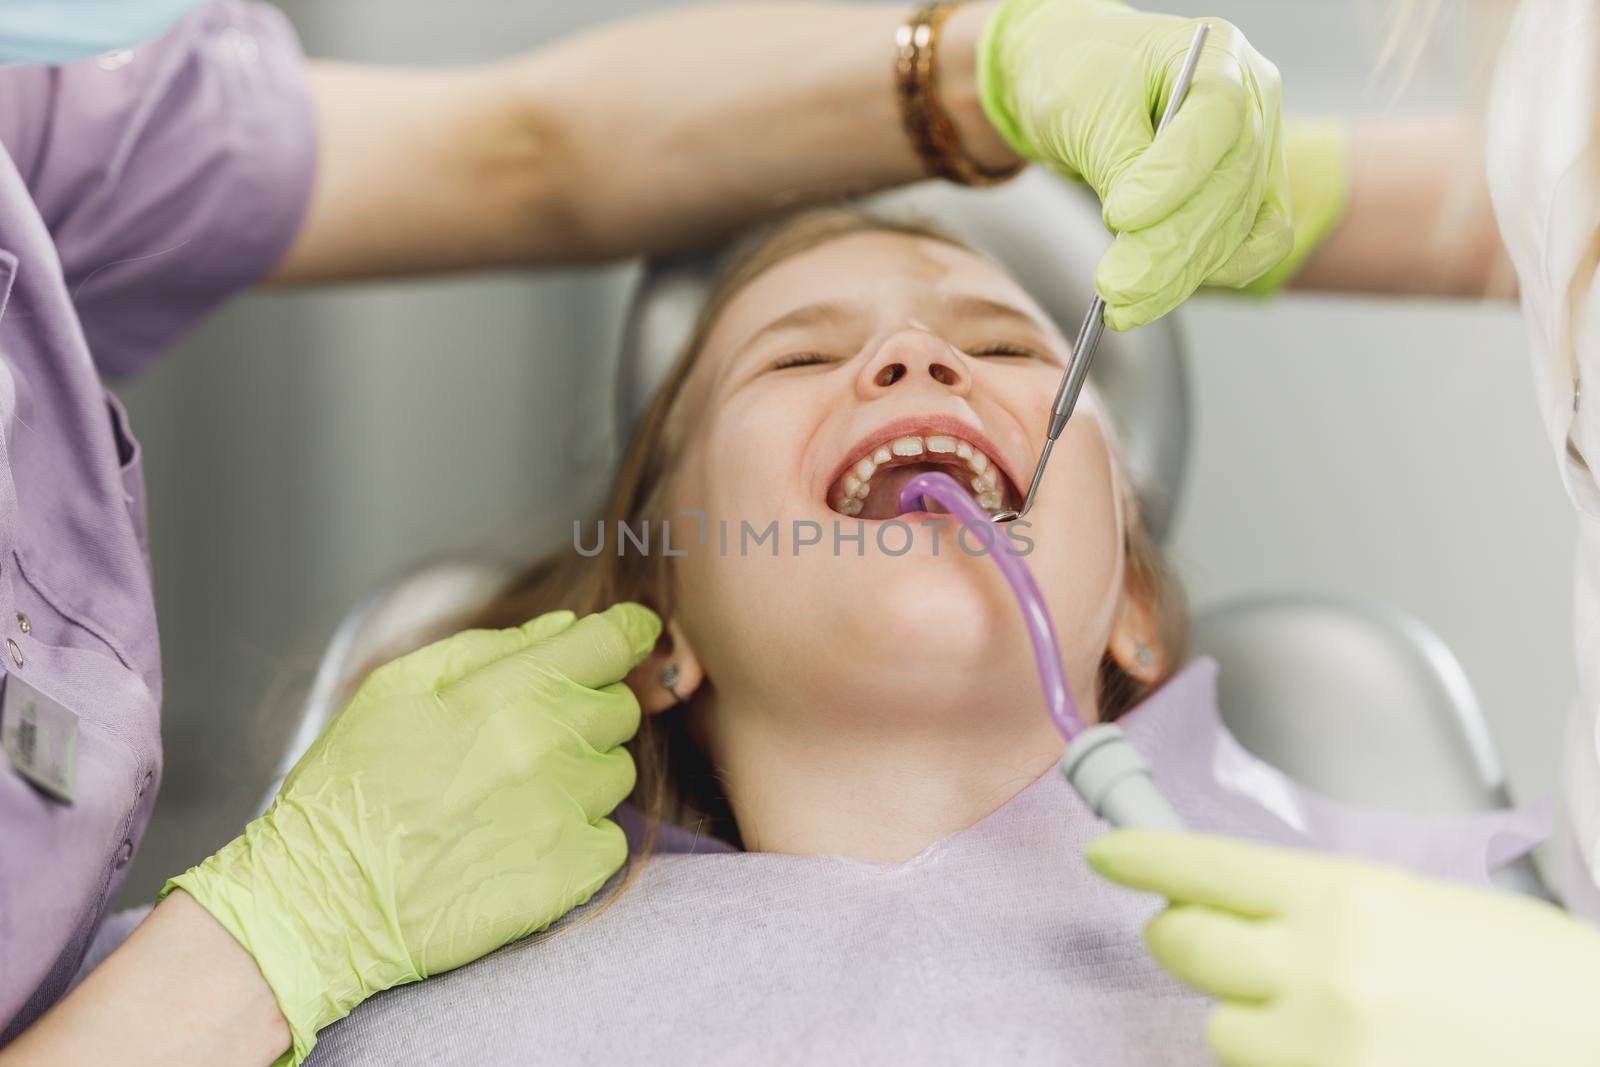 A cute little girl getting her teeth checked by dentist at dental clinic.